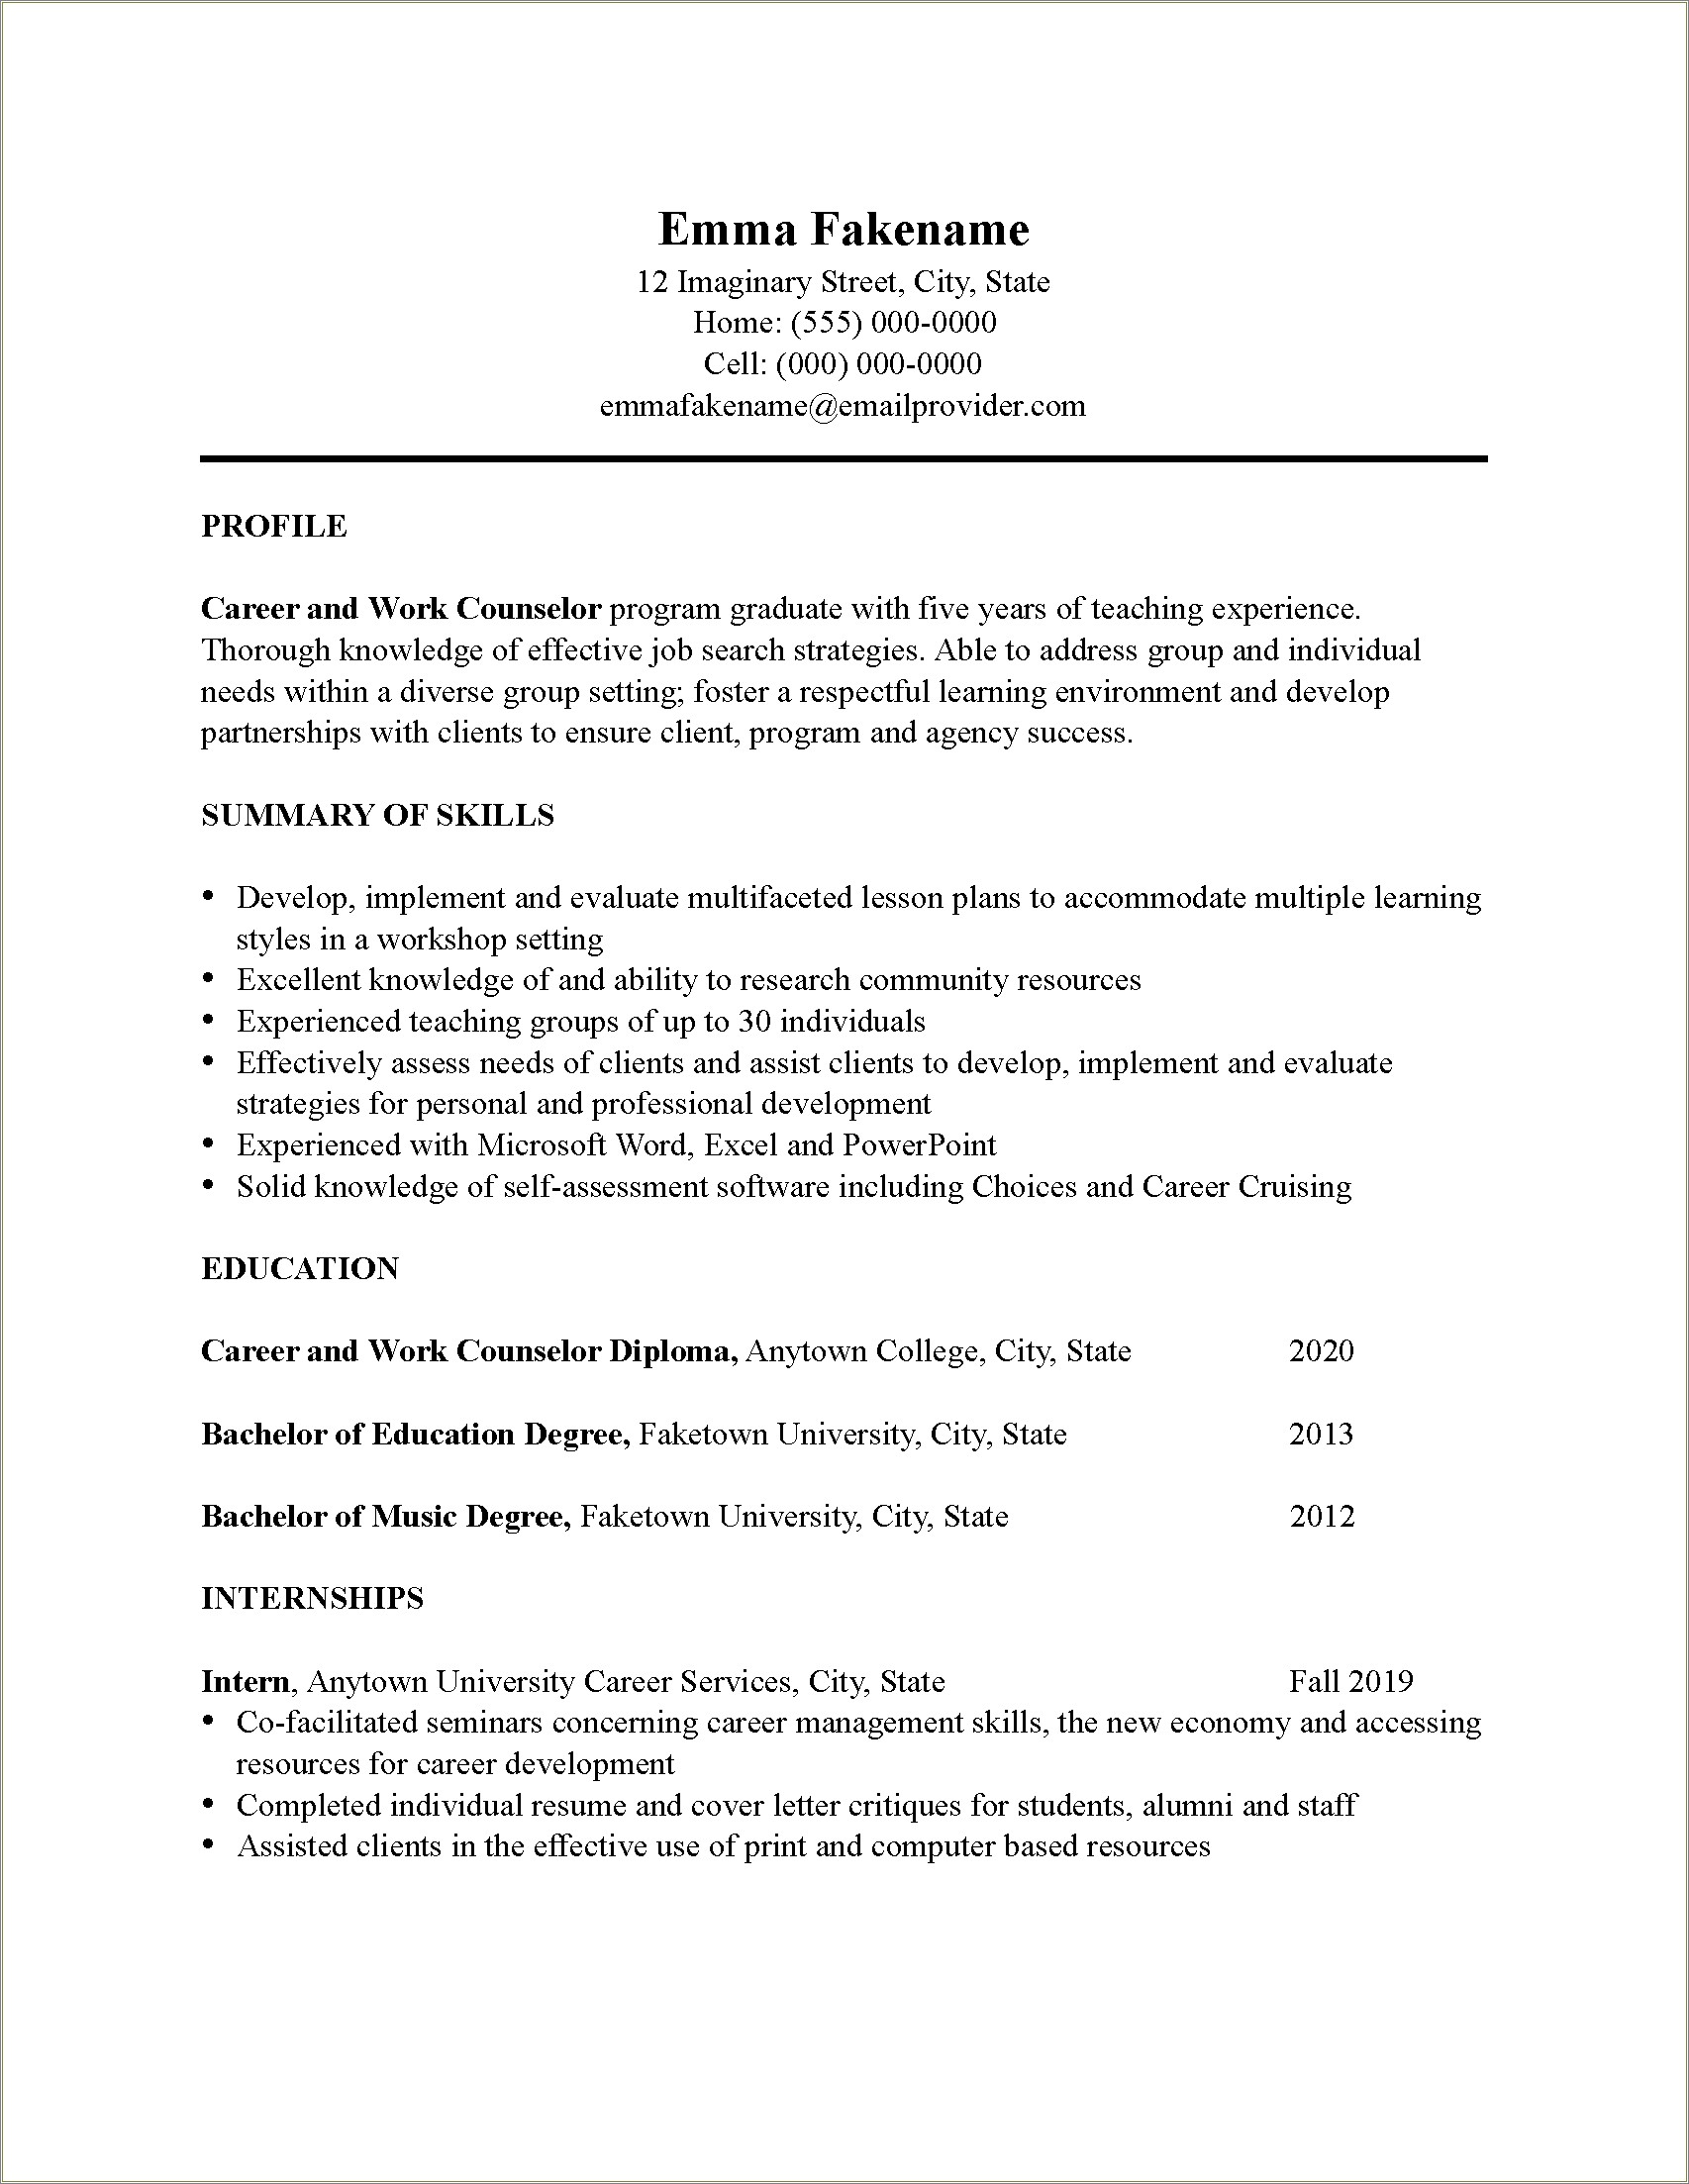 Resume Objective Examples For Career Changers